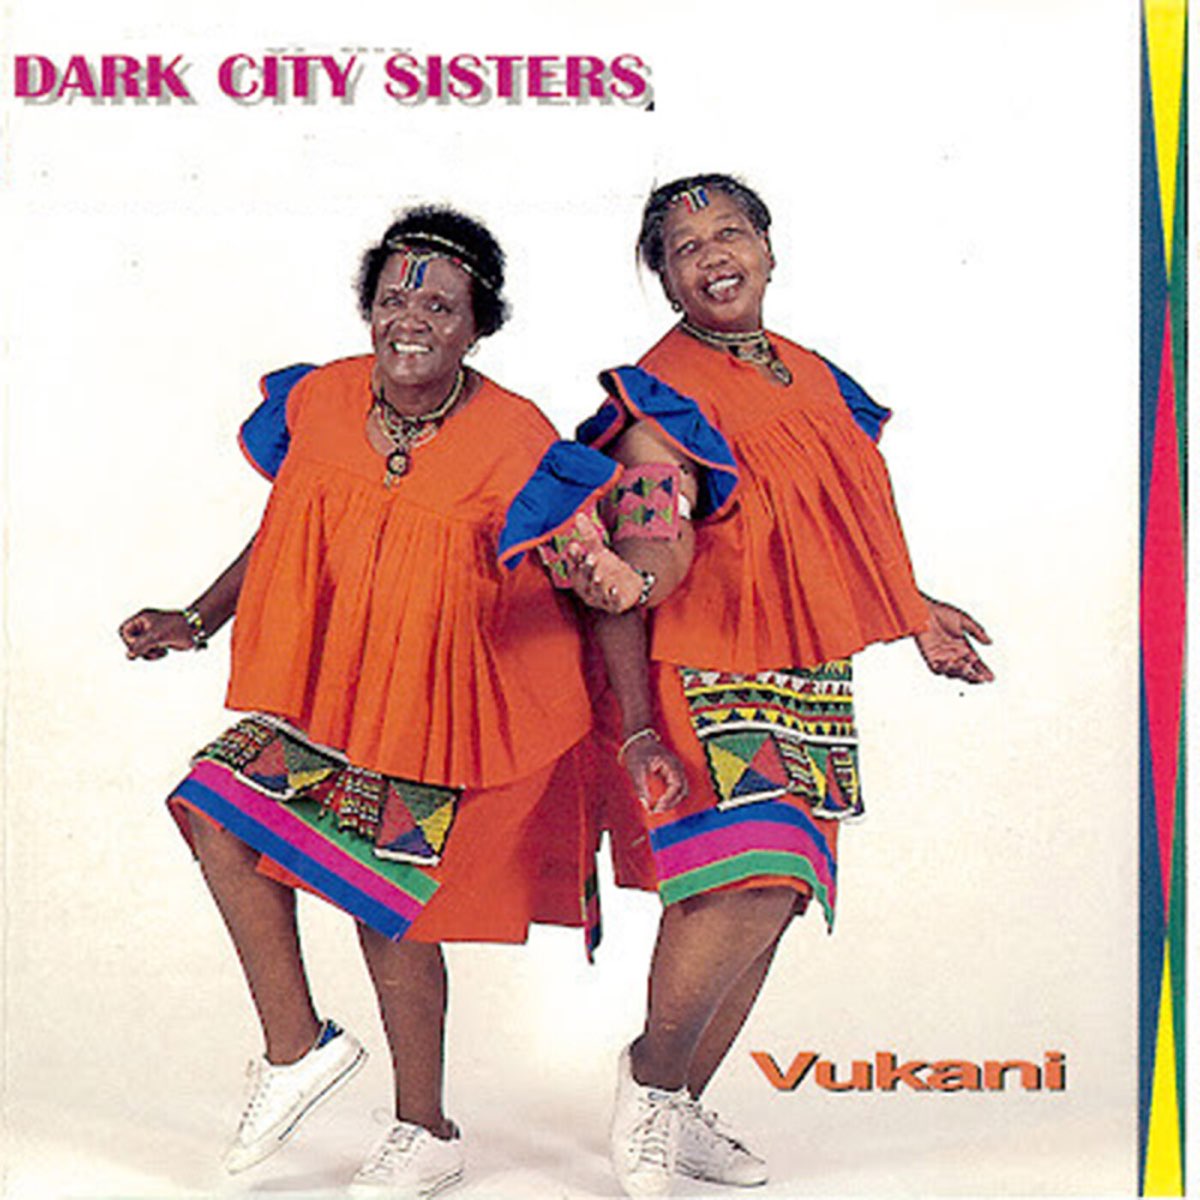 Sister cities. Twisted sister artist.